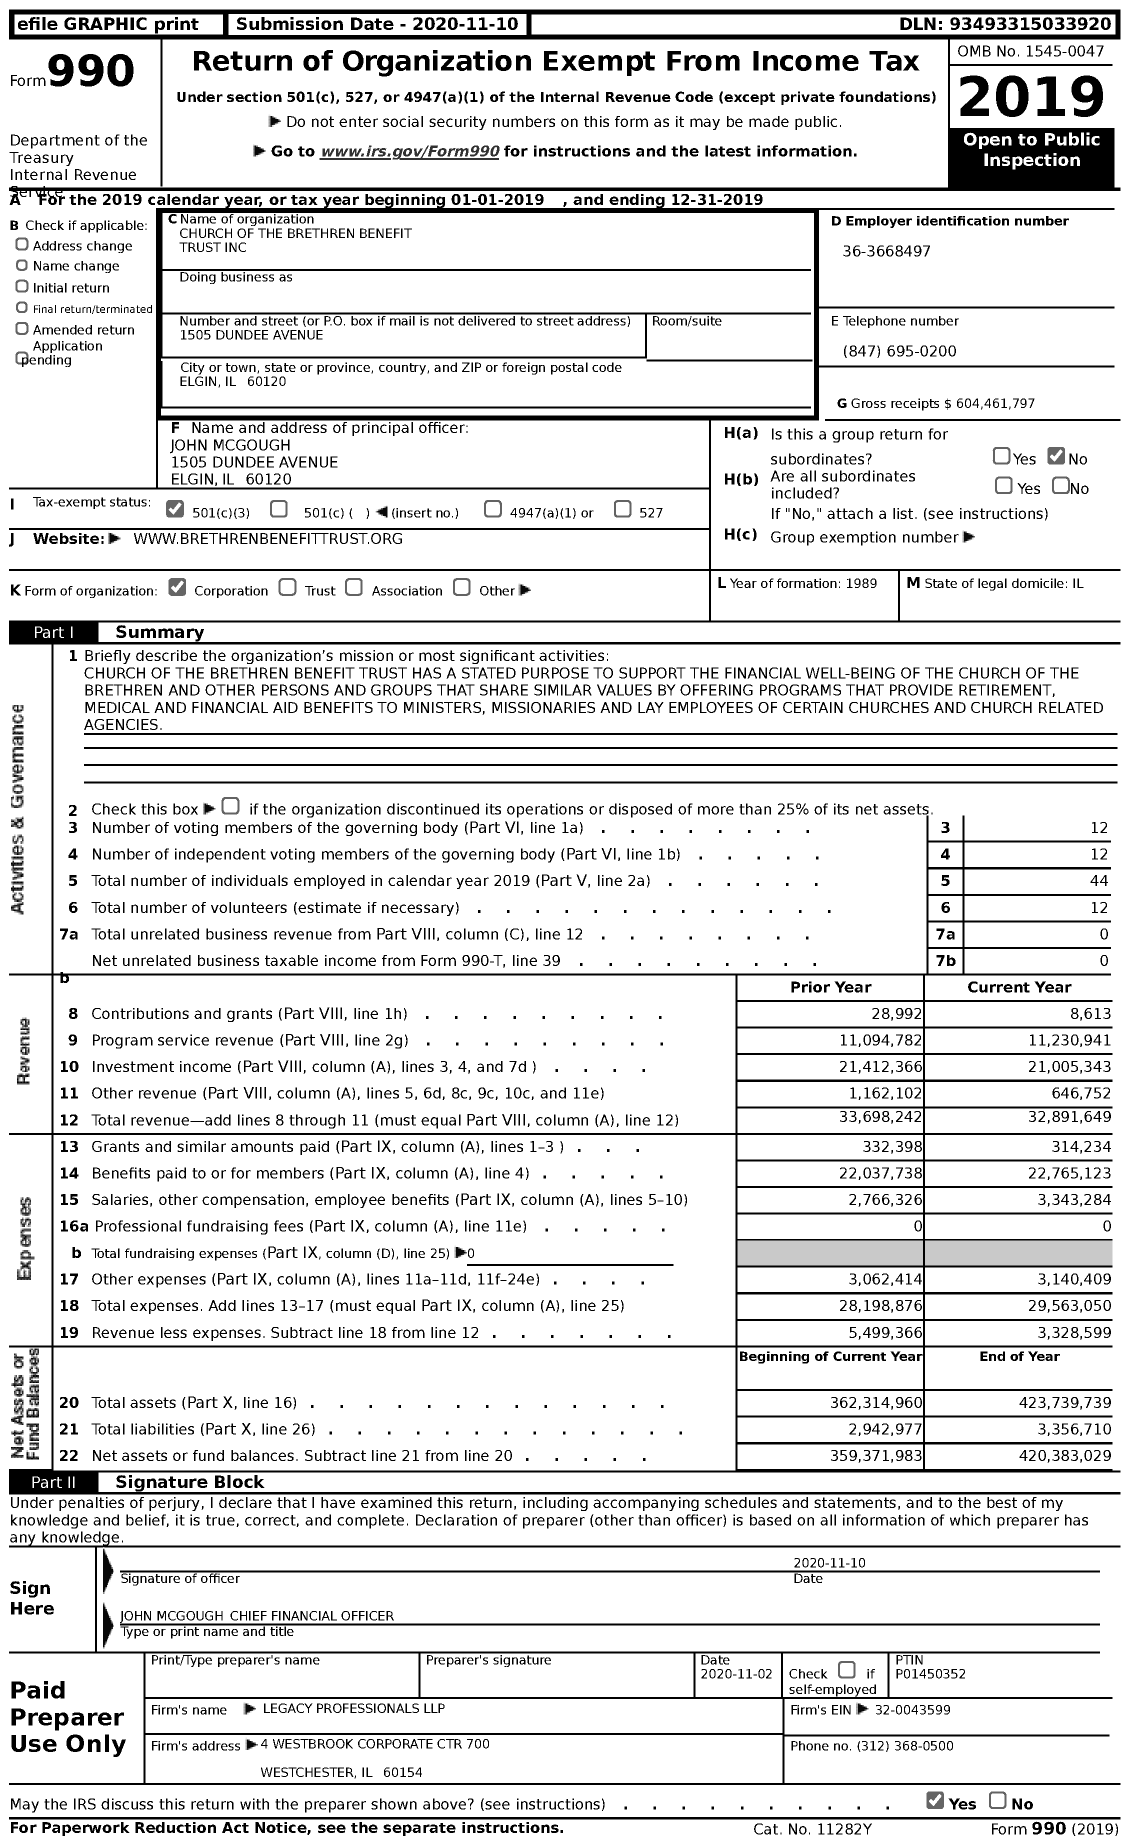 Image of first page of 2019 Form 990 for Eder Financial (BBT)